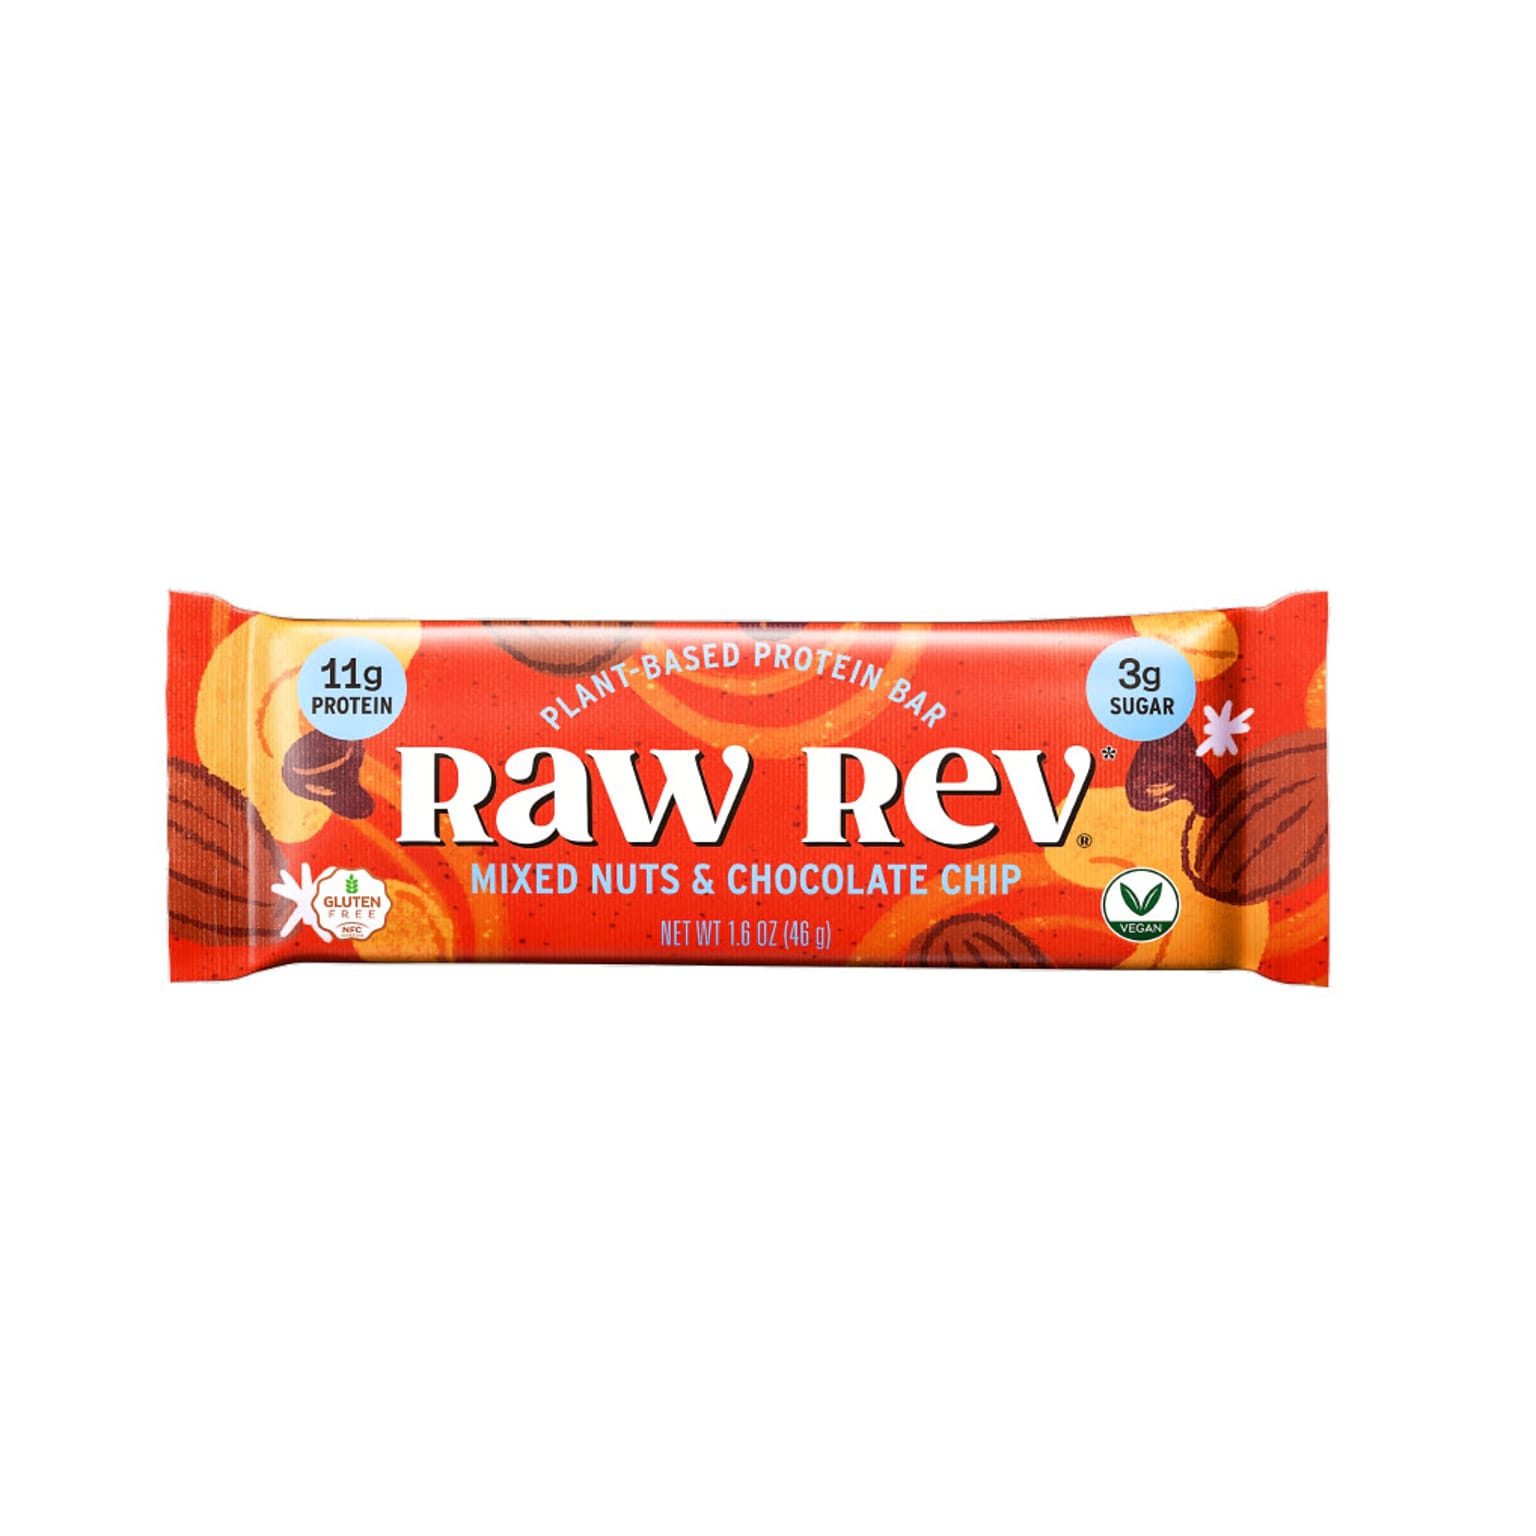 Raw Rev Gluten Free Mixed Nuts & Chocolate Chip Protein Bar, 1.6 oz., 12 Bars/Box (RR-S-CCSS-1)